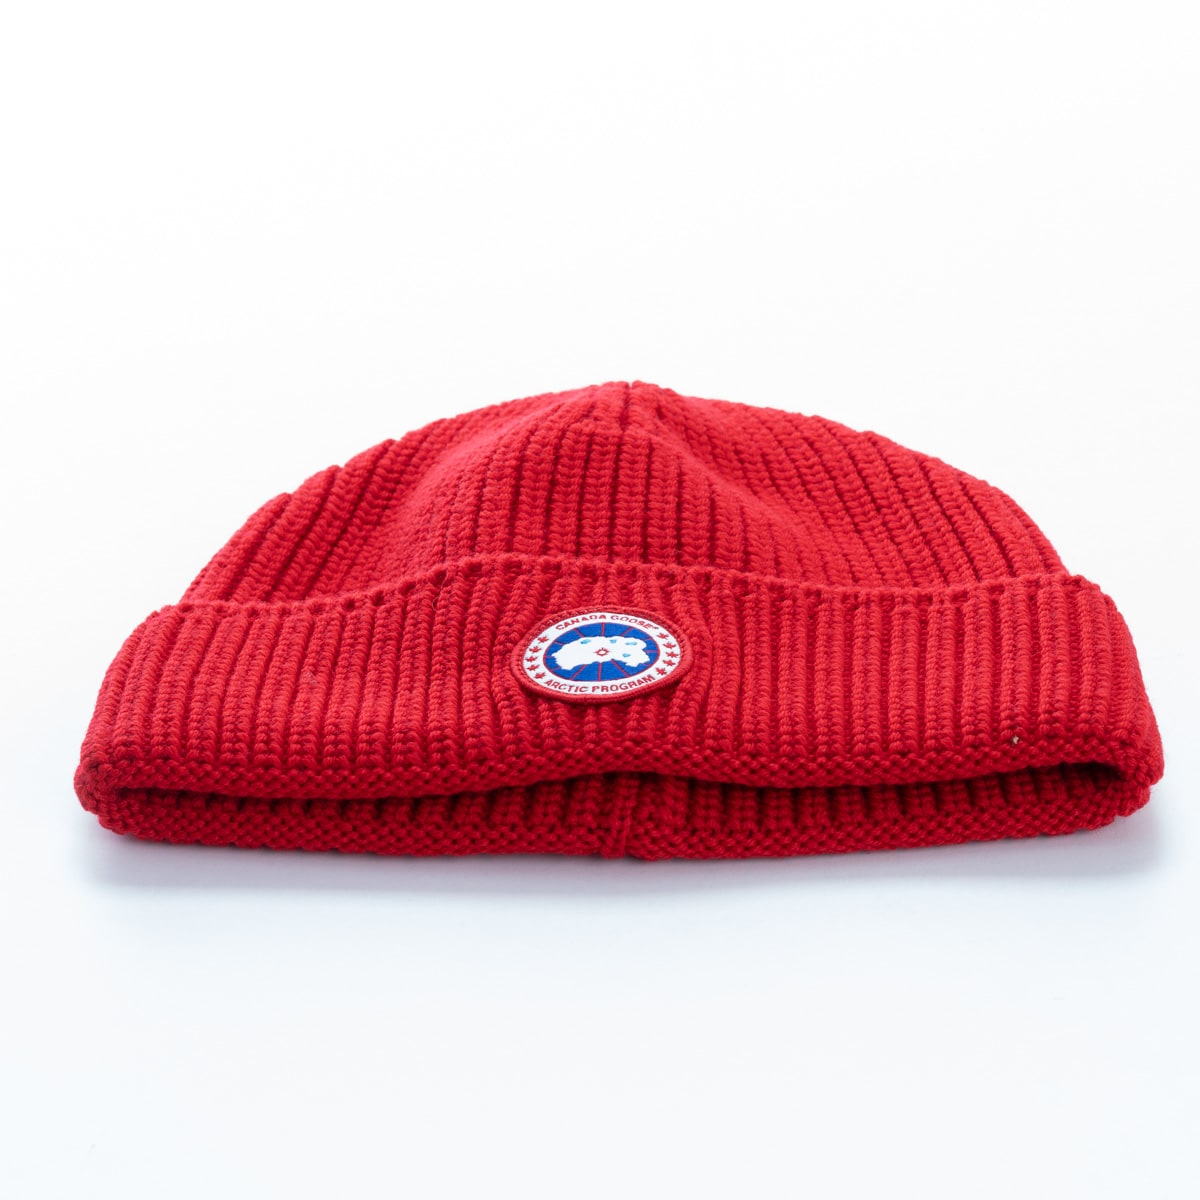 Canada Goose Canada Goose toque With Ribbed Border And Classic Disc Merino Wool Hat